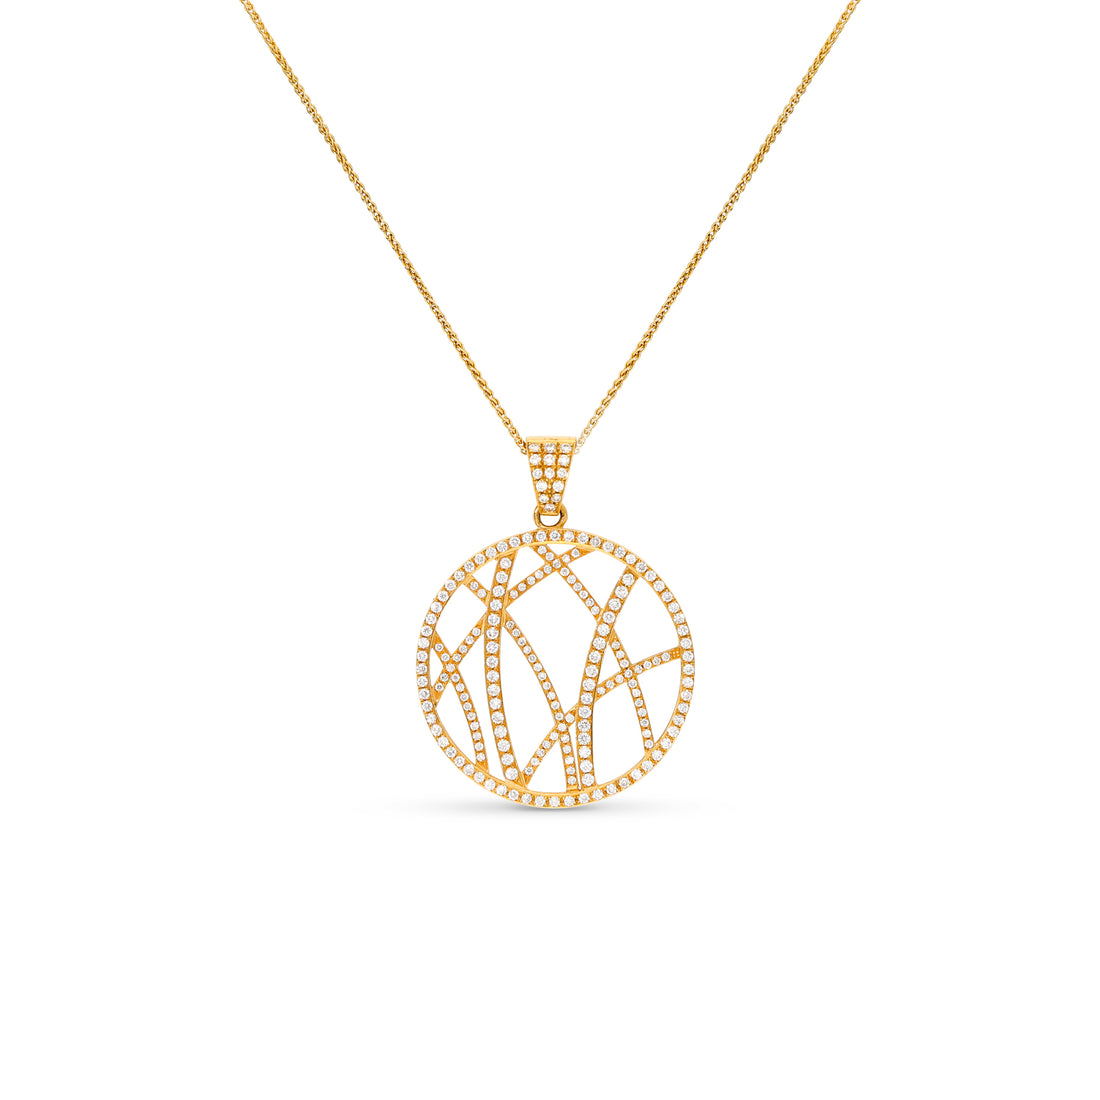 1.20 carat Bamboo forest diamond pendant in 18k yellow gold 